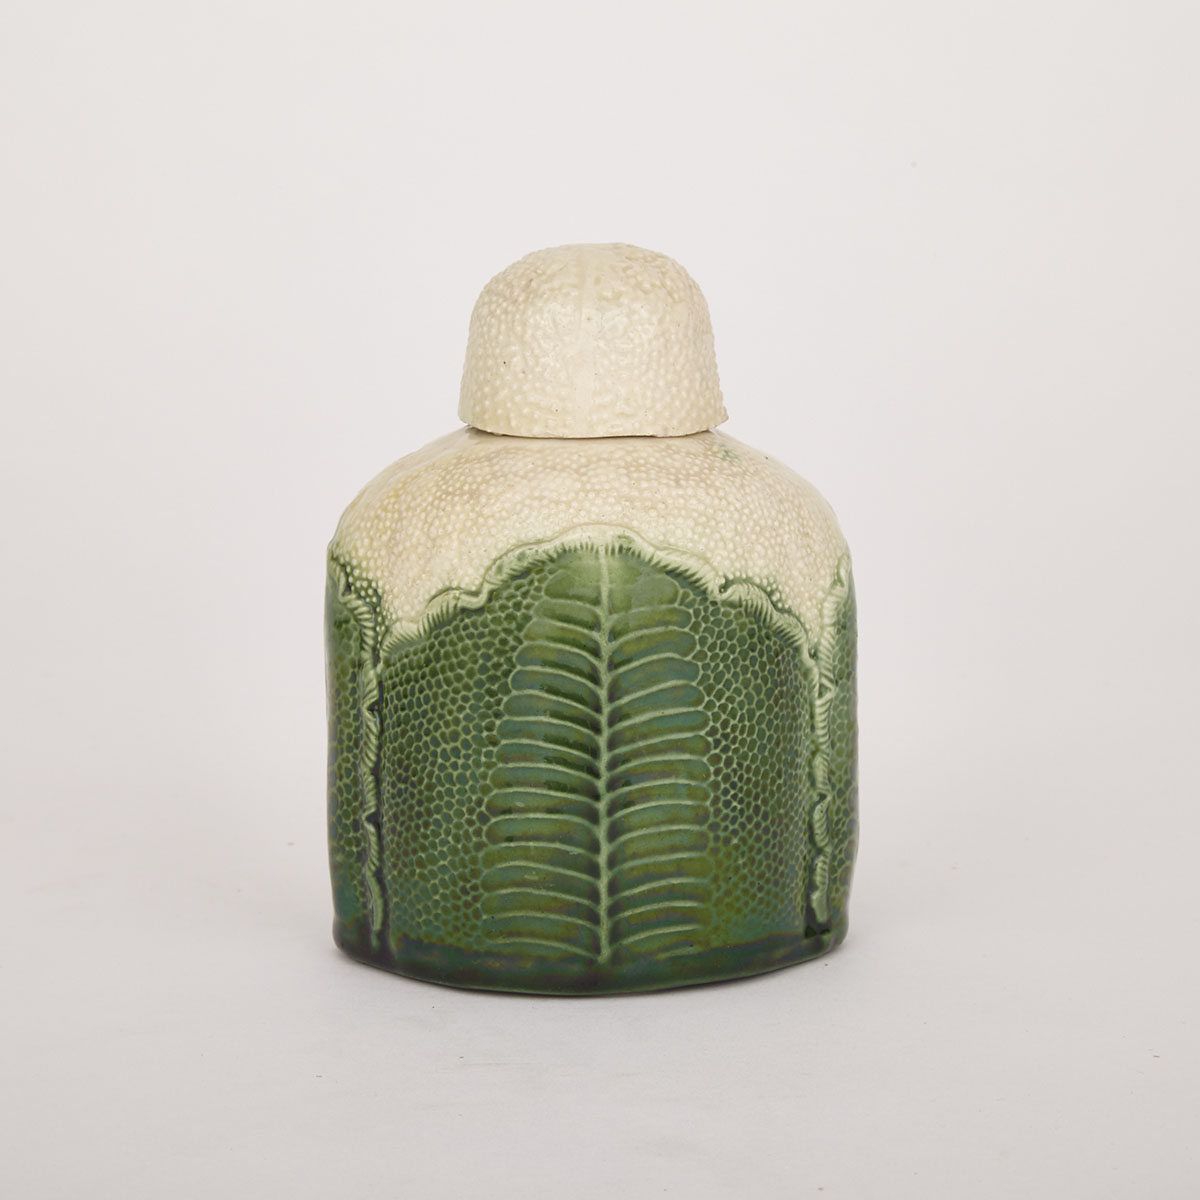 Staffordshire Green-Glazed Creamware Cauliflower Form Tea Canister and Cover, c.1760-70